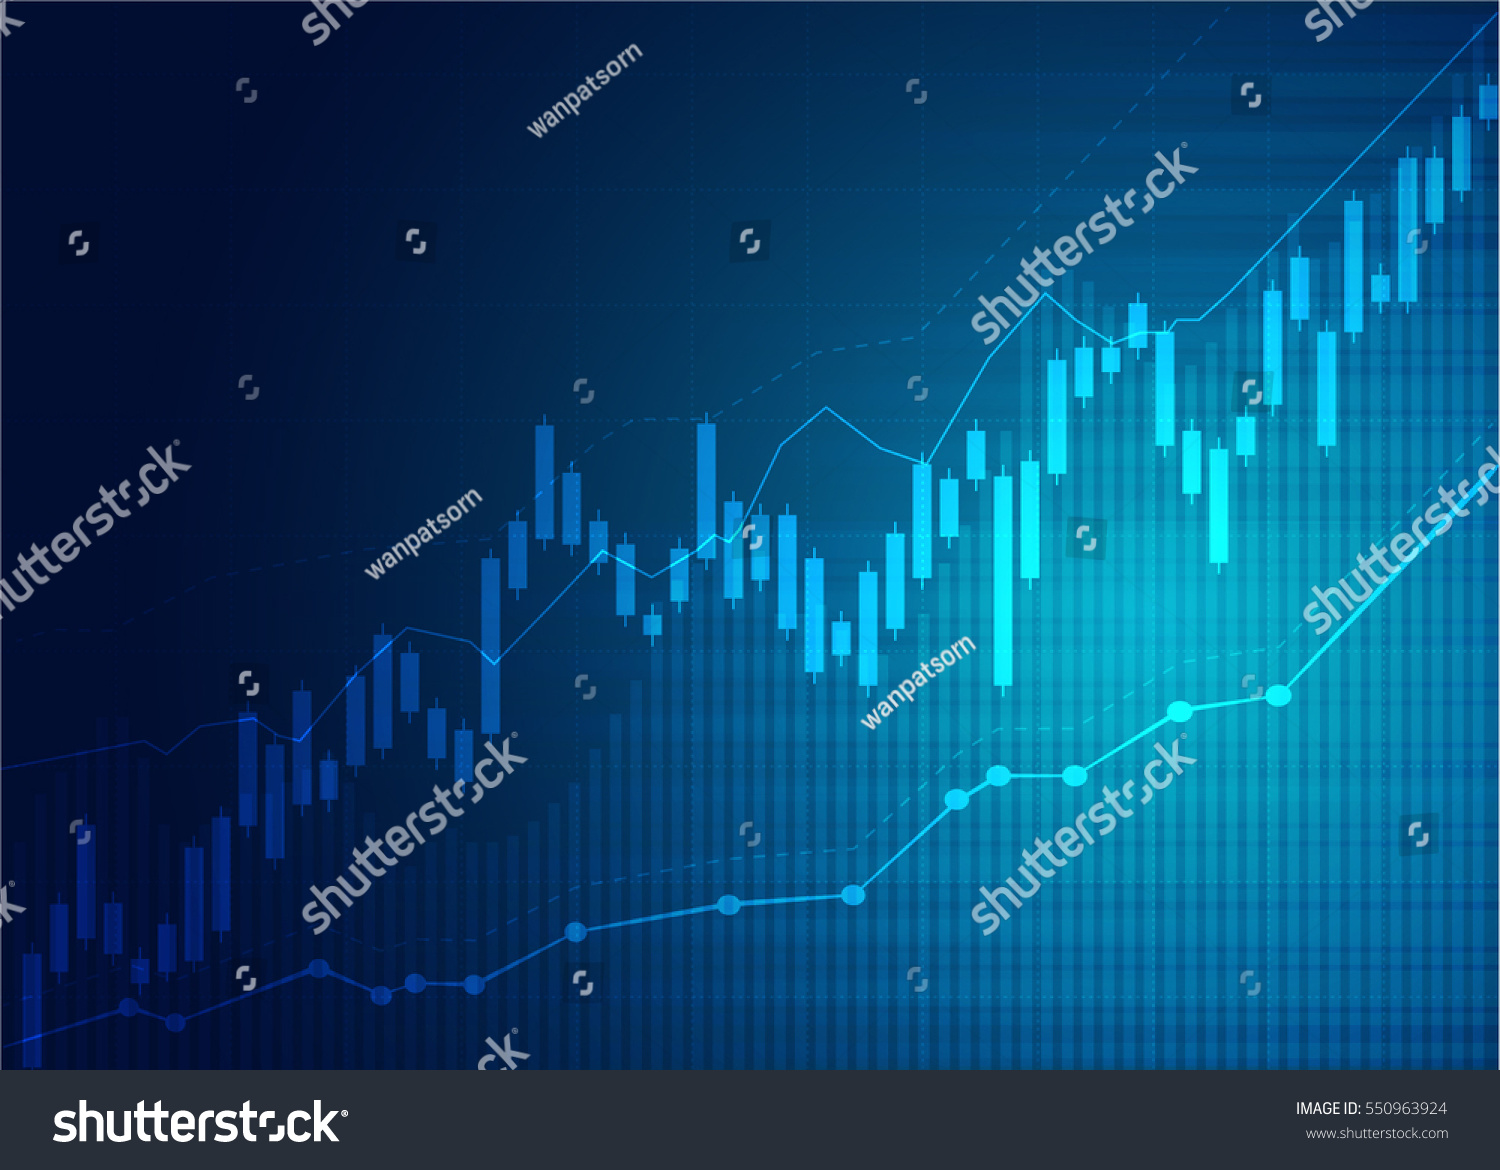 SVG of Candle stick graph chart of stock market investment trading, Bullish point, Bearish point. trend of graph vector design. svg